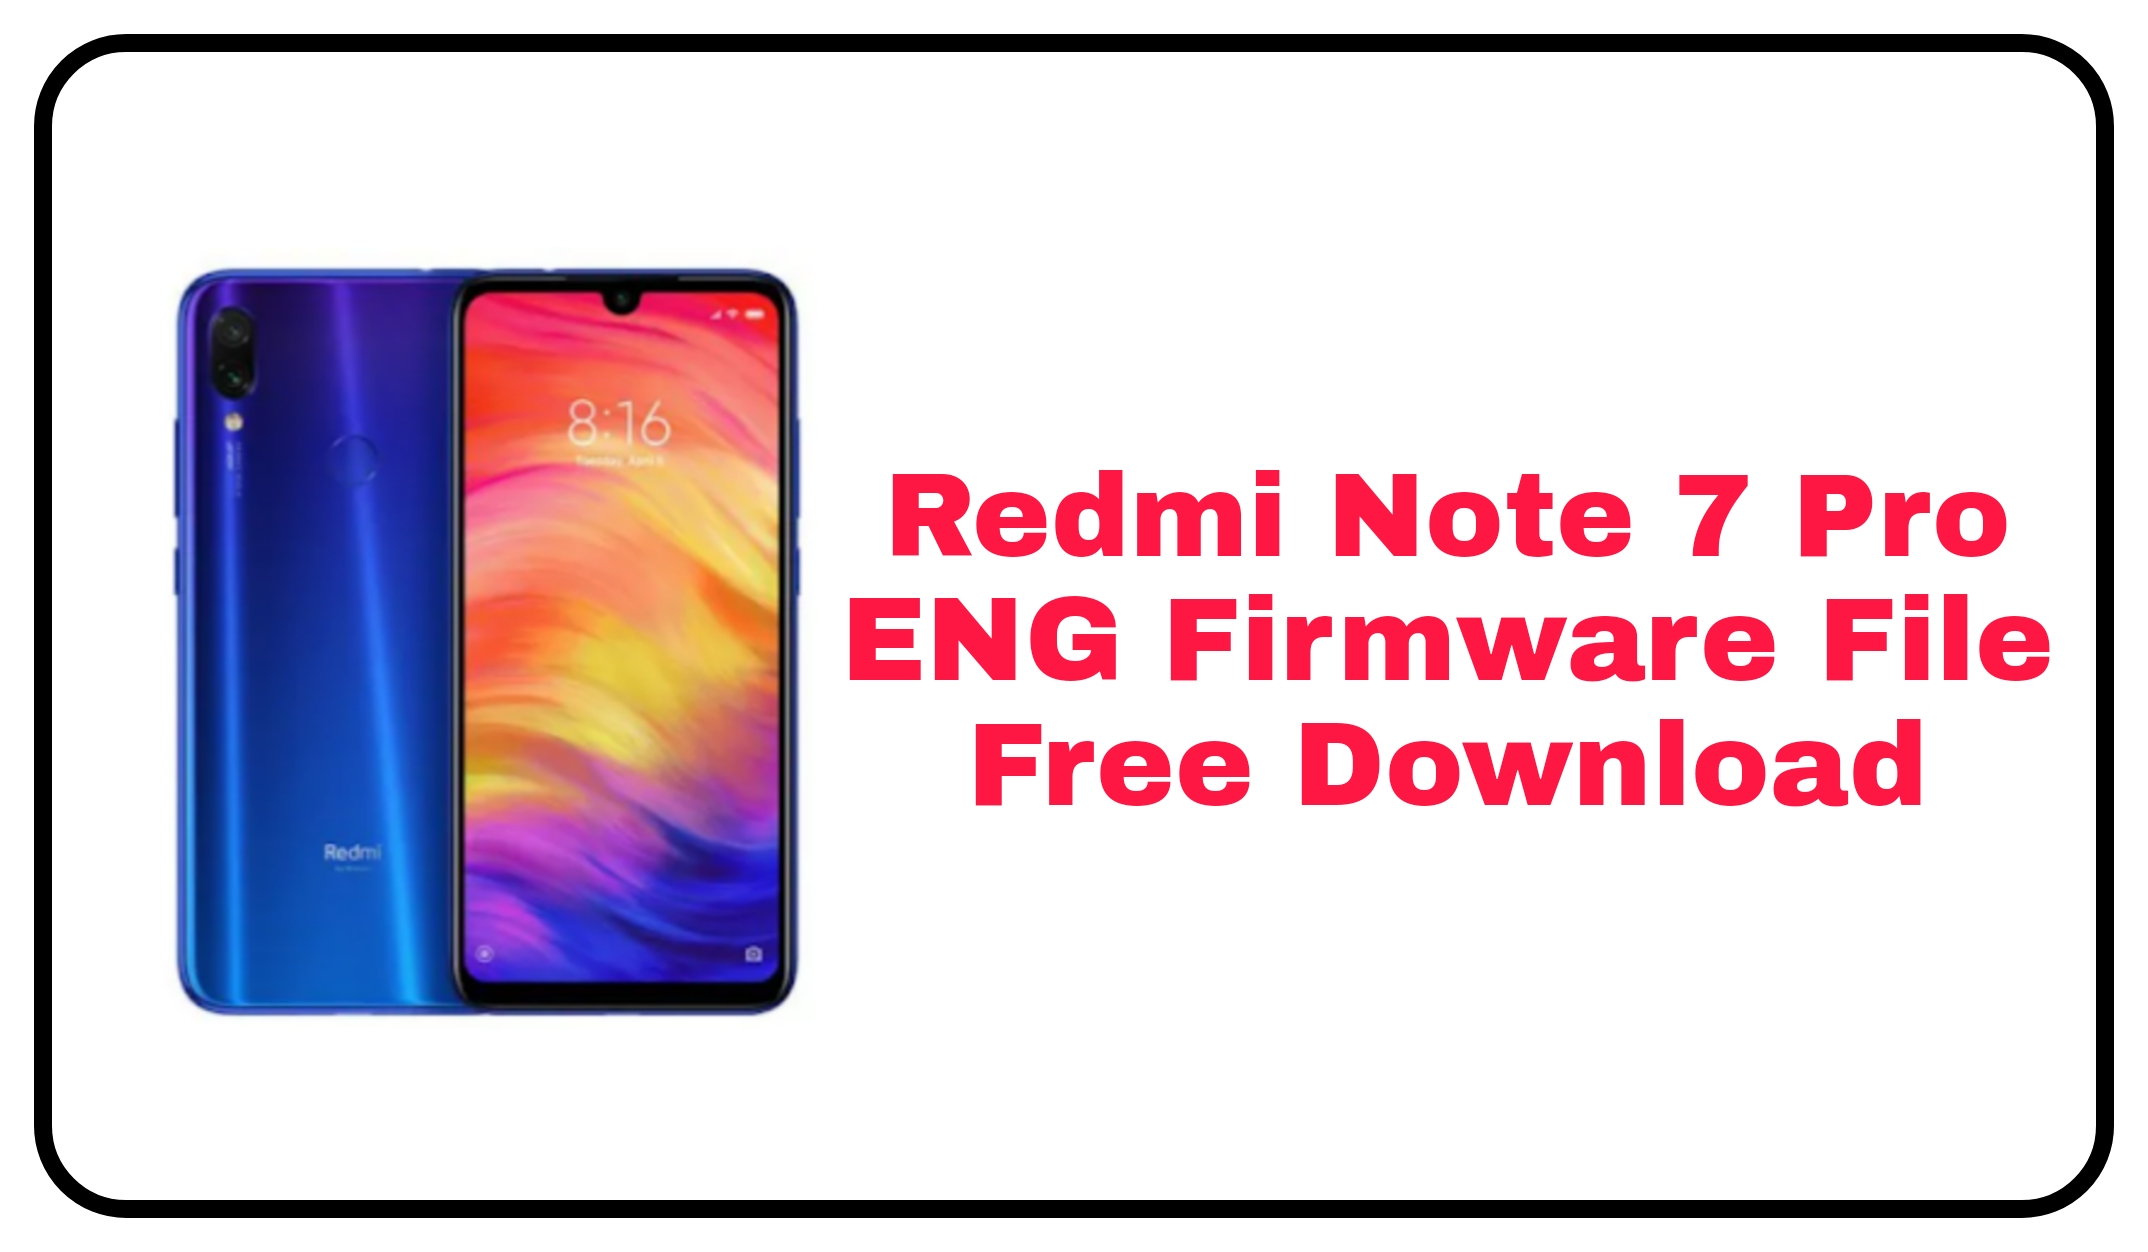 Redmi Note 7 Pro ENG Firmware File Free Download